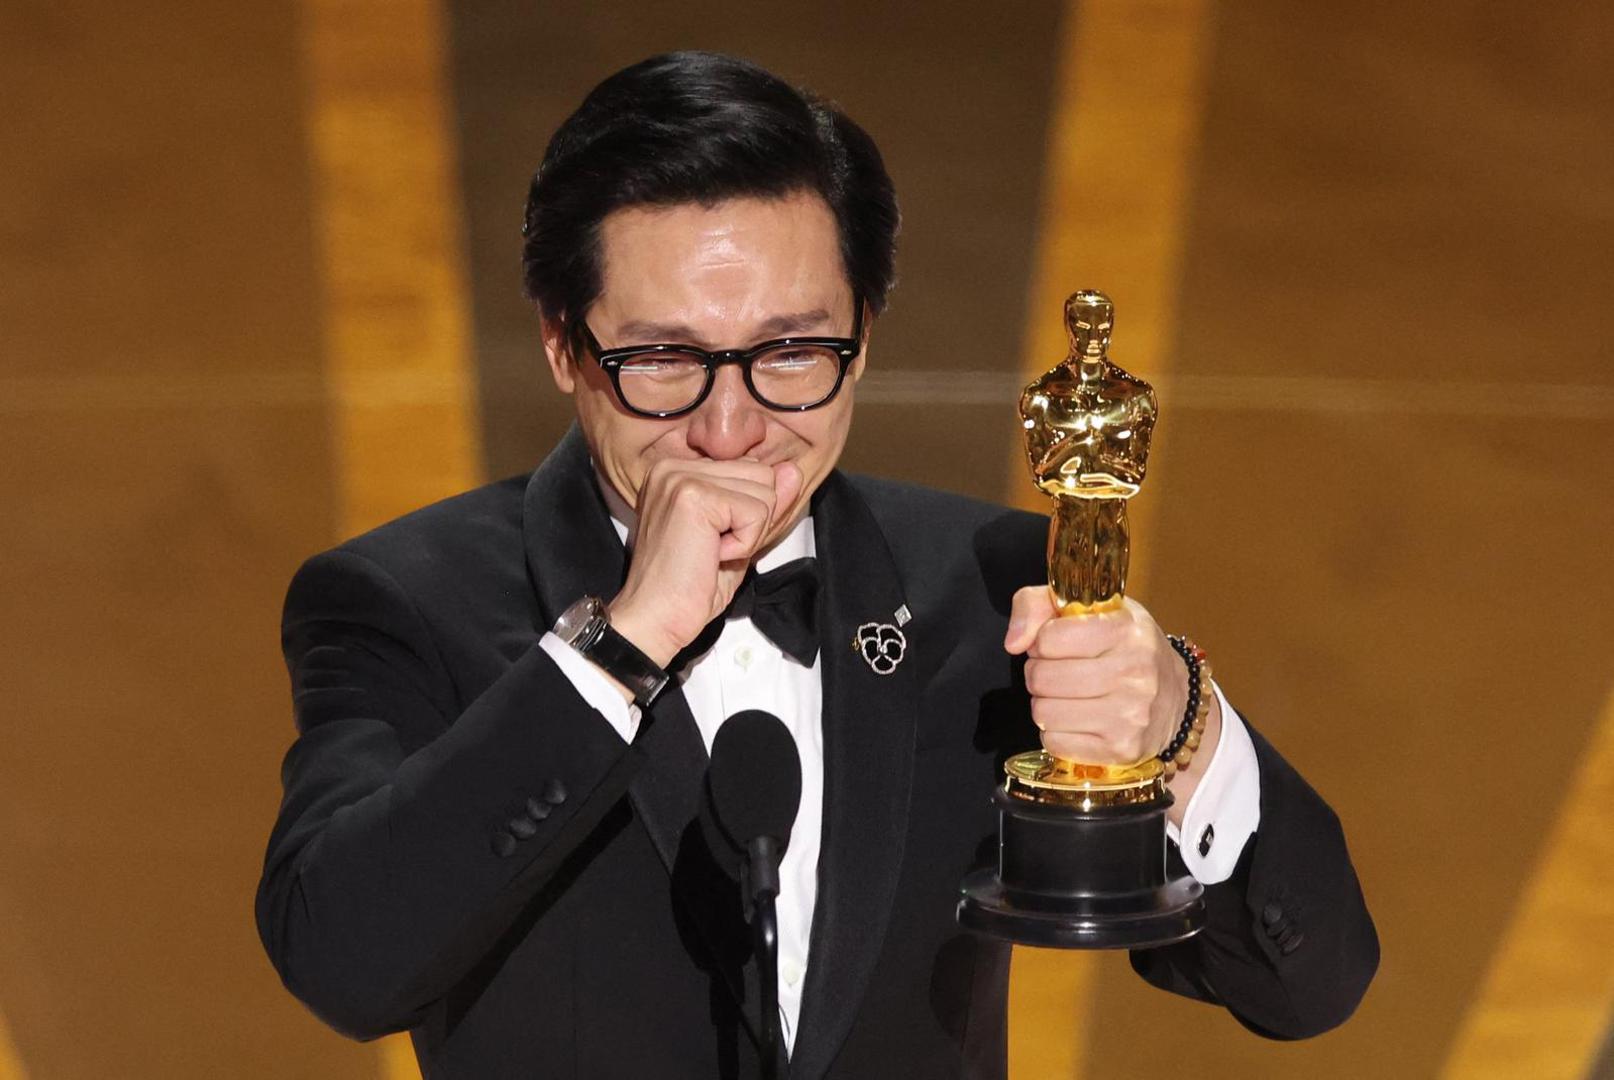 Ke Huy Quan wins the Oscar for Best Supporting Actor for "Everything Everywhere All at Once" during the Oscars show at the 95th Academy Awards in Hollywood, Los Angeles, California, U.S., March 12, 2023. REUTERS/Carlos Barria Photo: CARLOS BARRIA/REUTERS